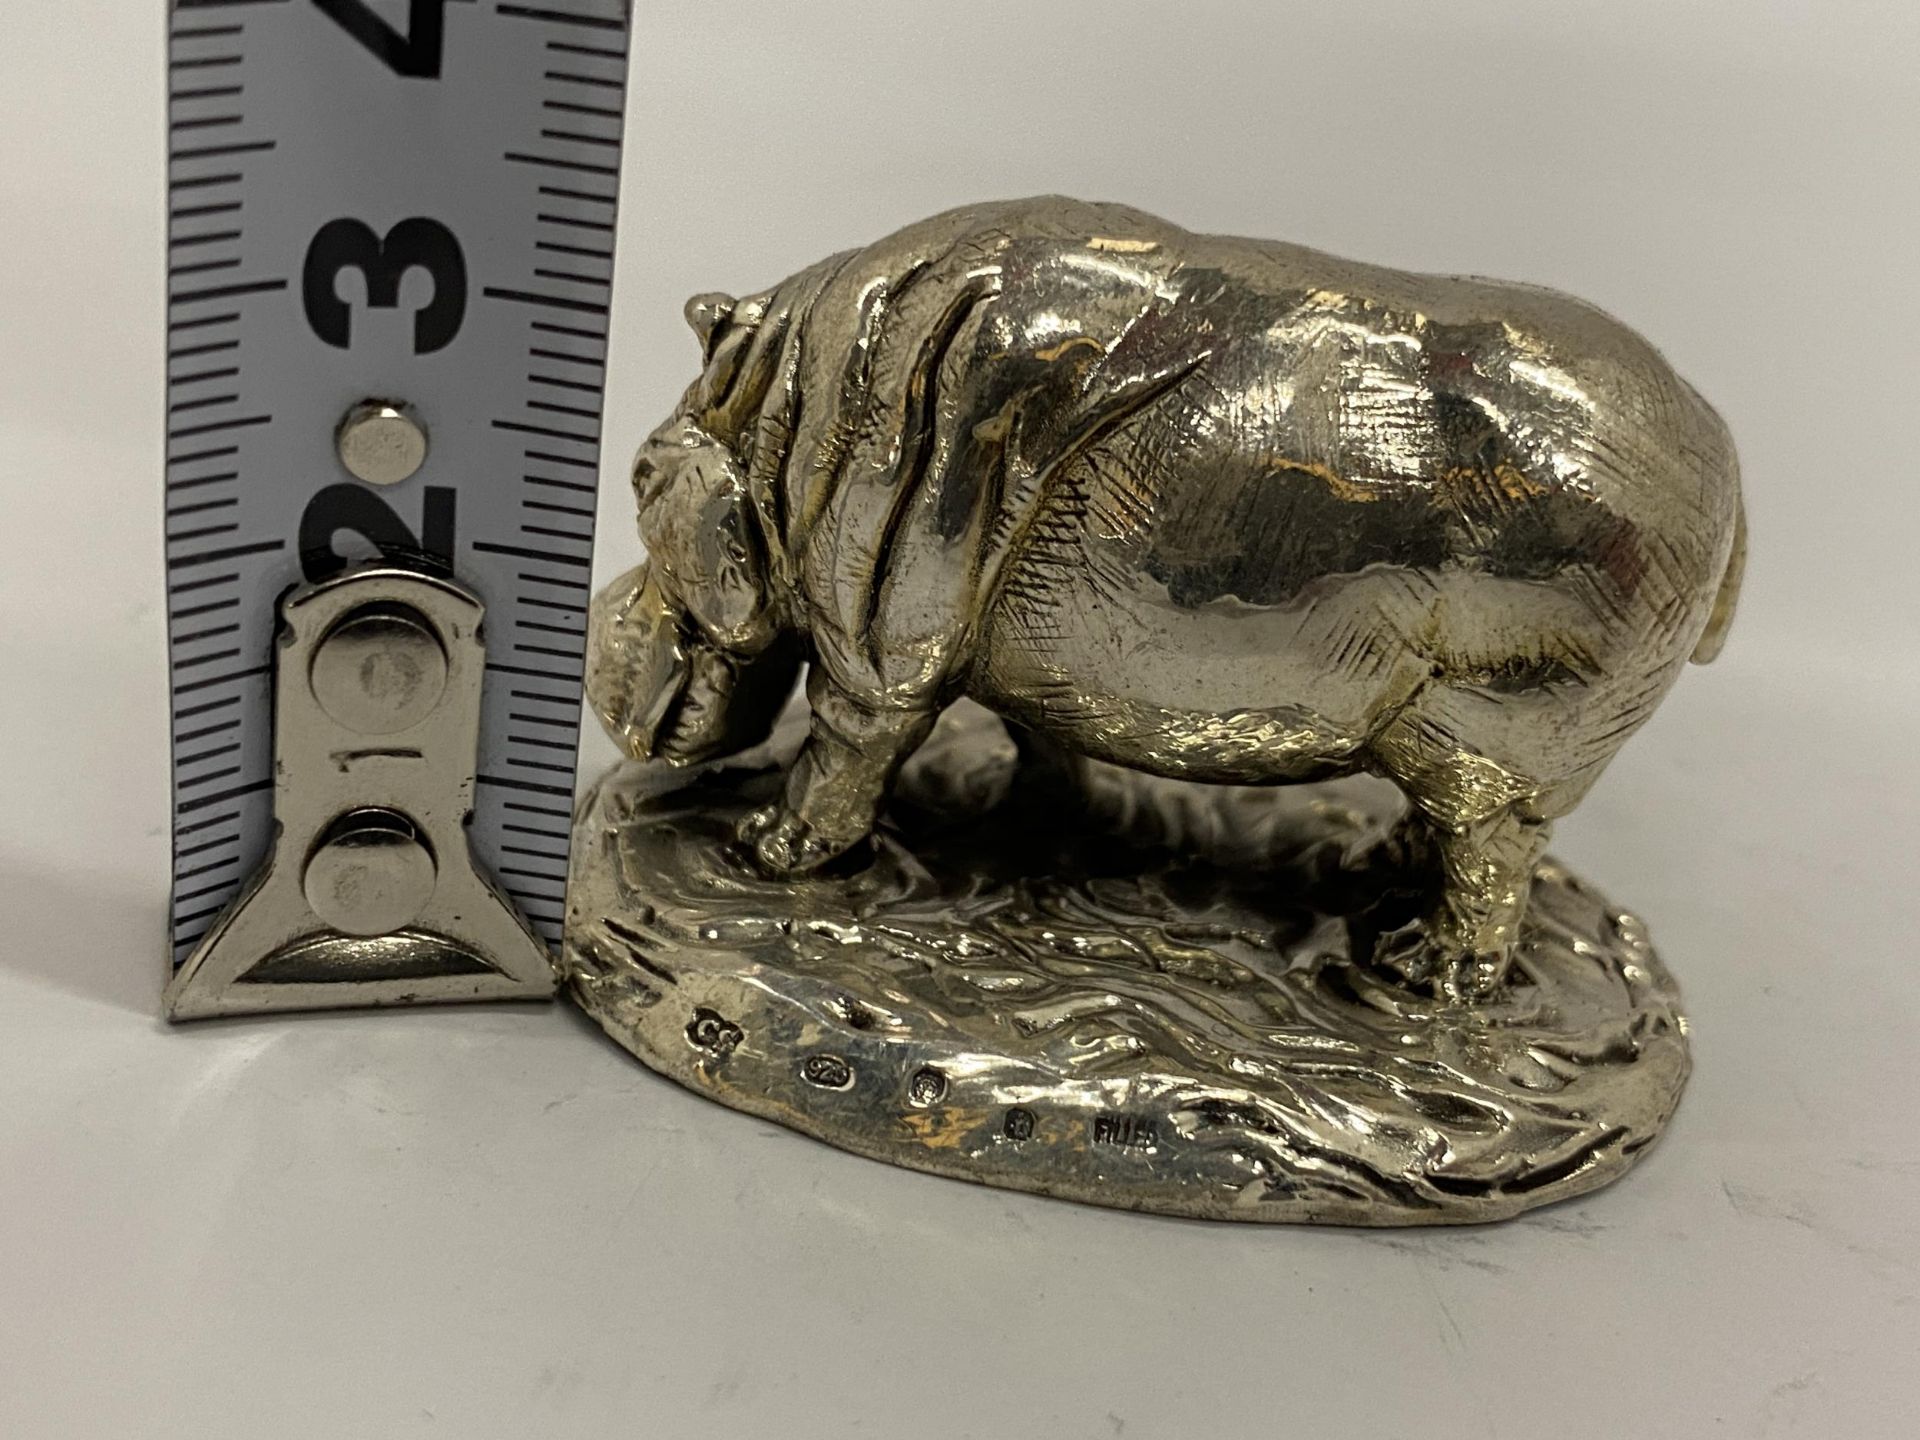 A HALLMARKED SILVER FILLED CAMELOT SILVERWARE LTD HIPPO FIGURE - Image 4 of 4